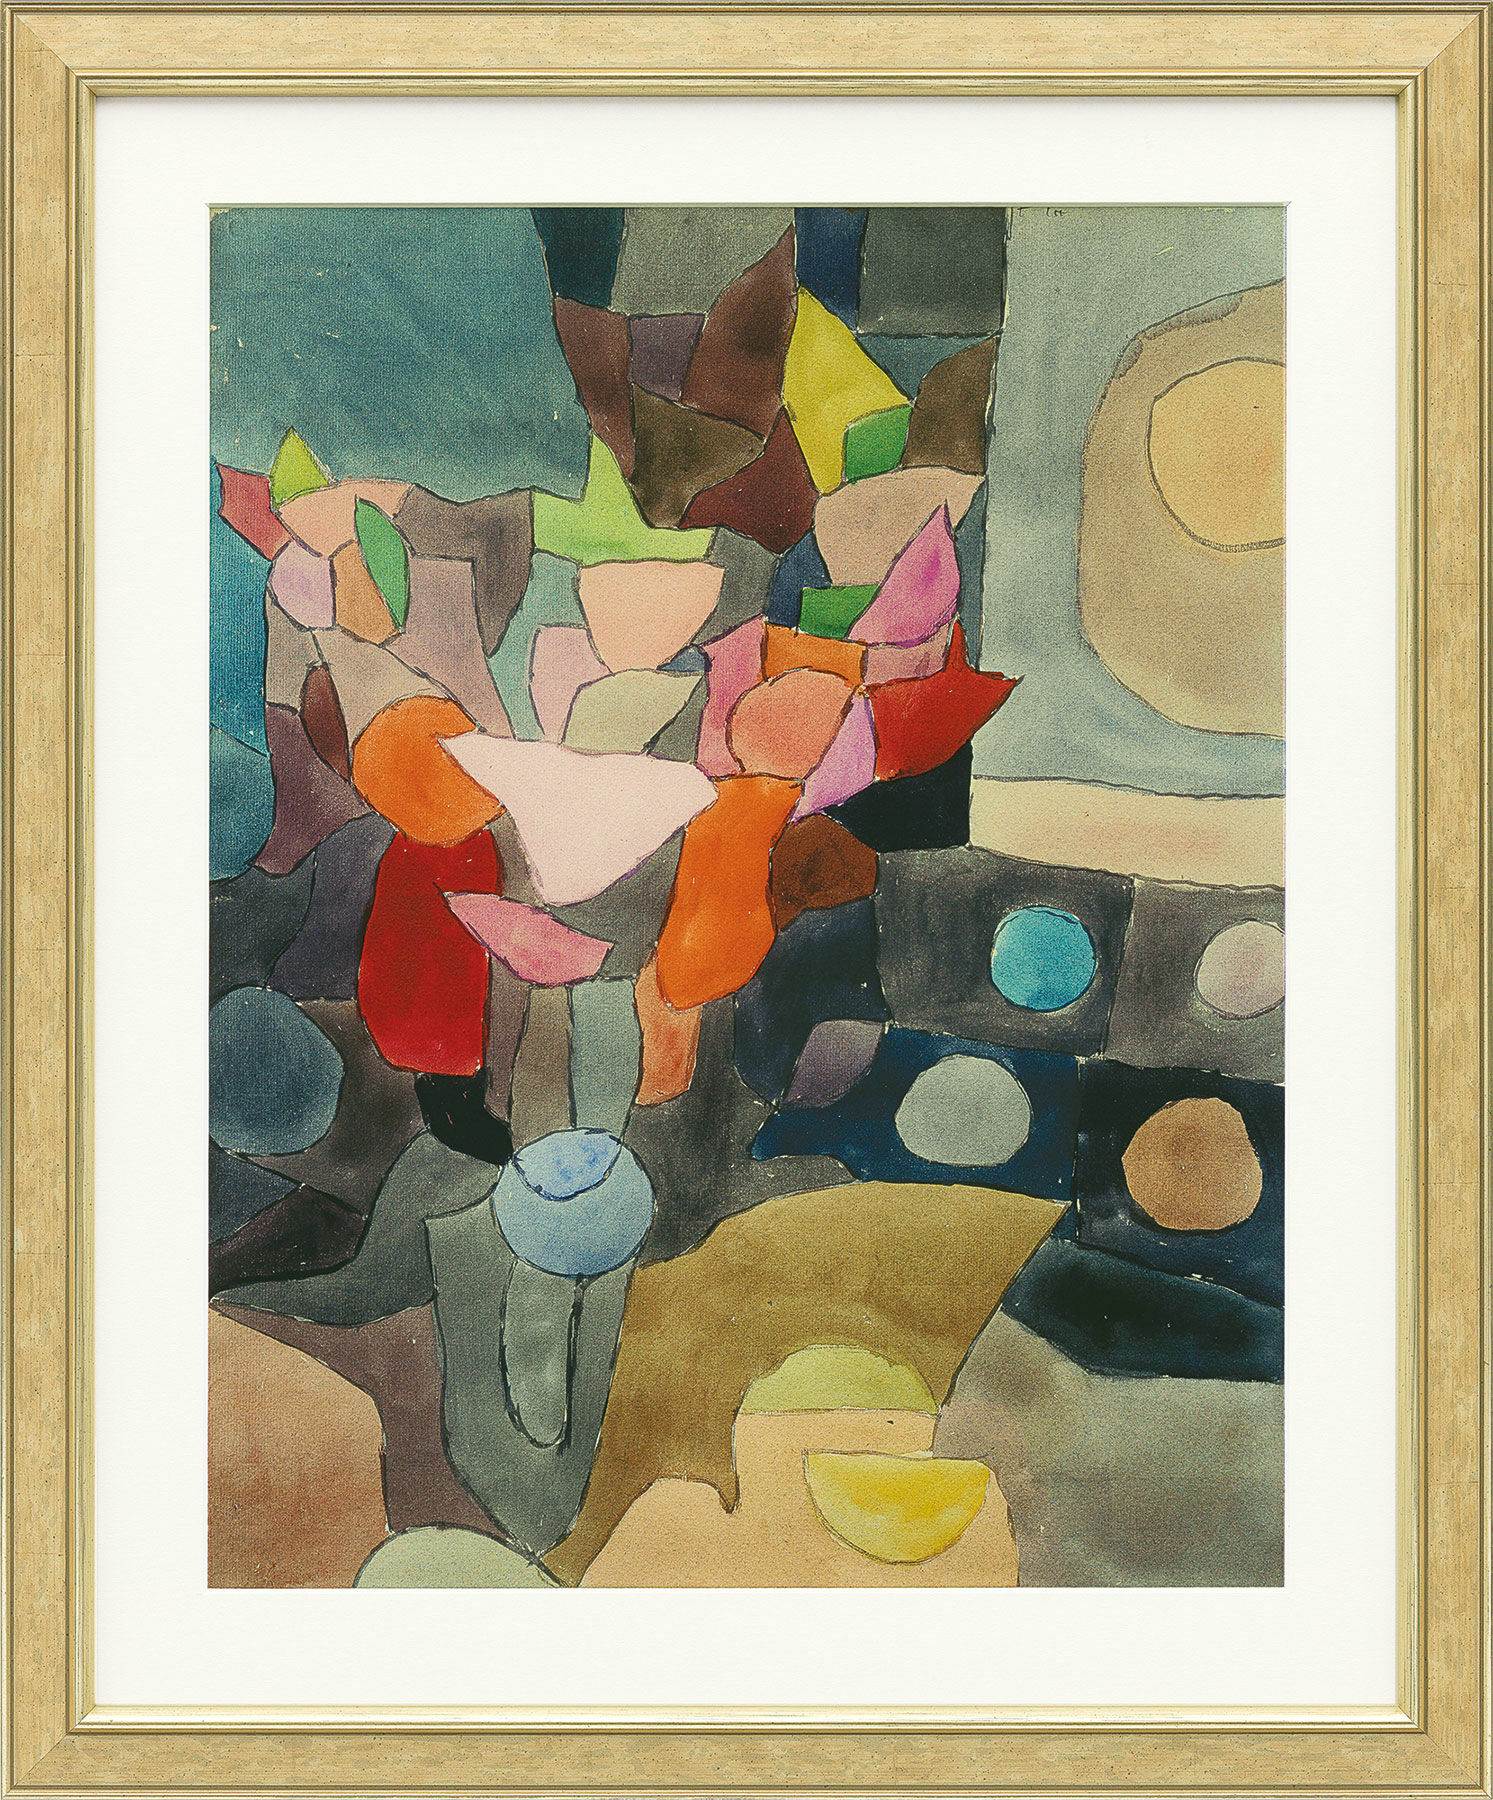 Picture "Still Life with Gladioli" (1932), framed by Paul Klee